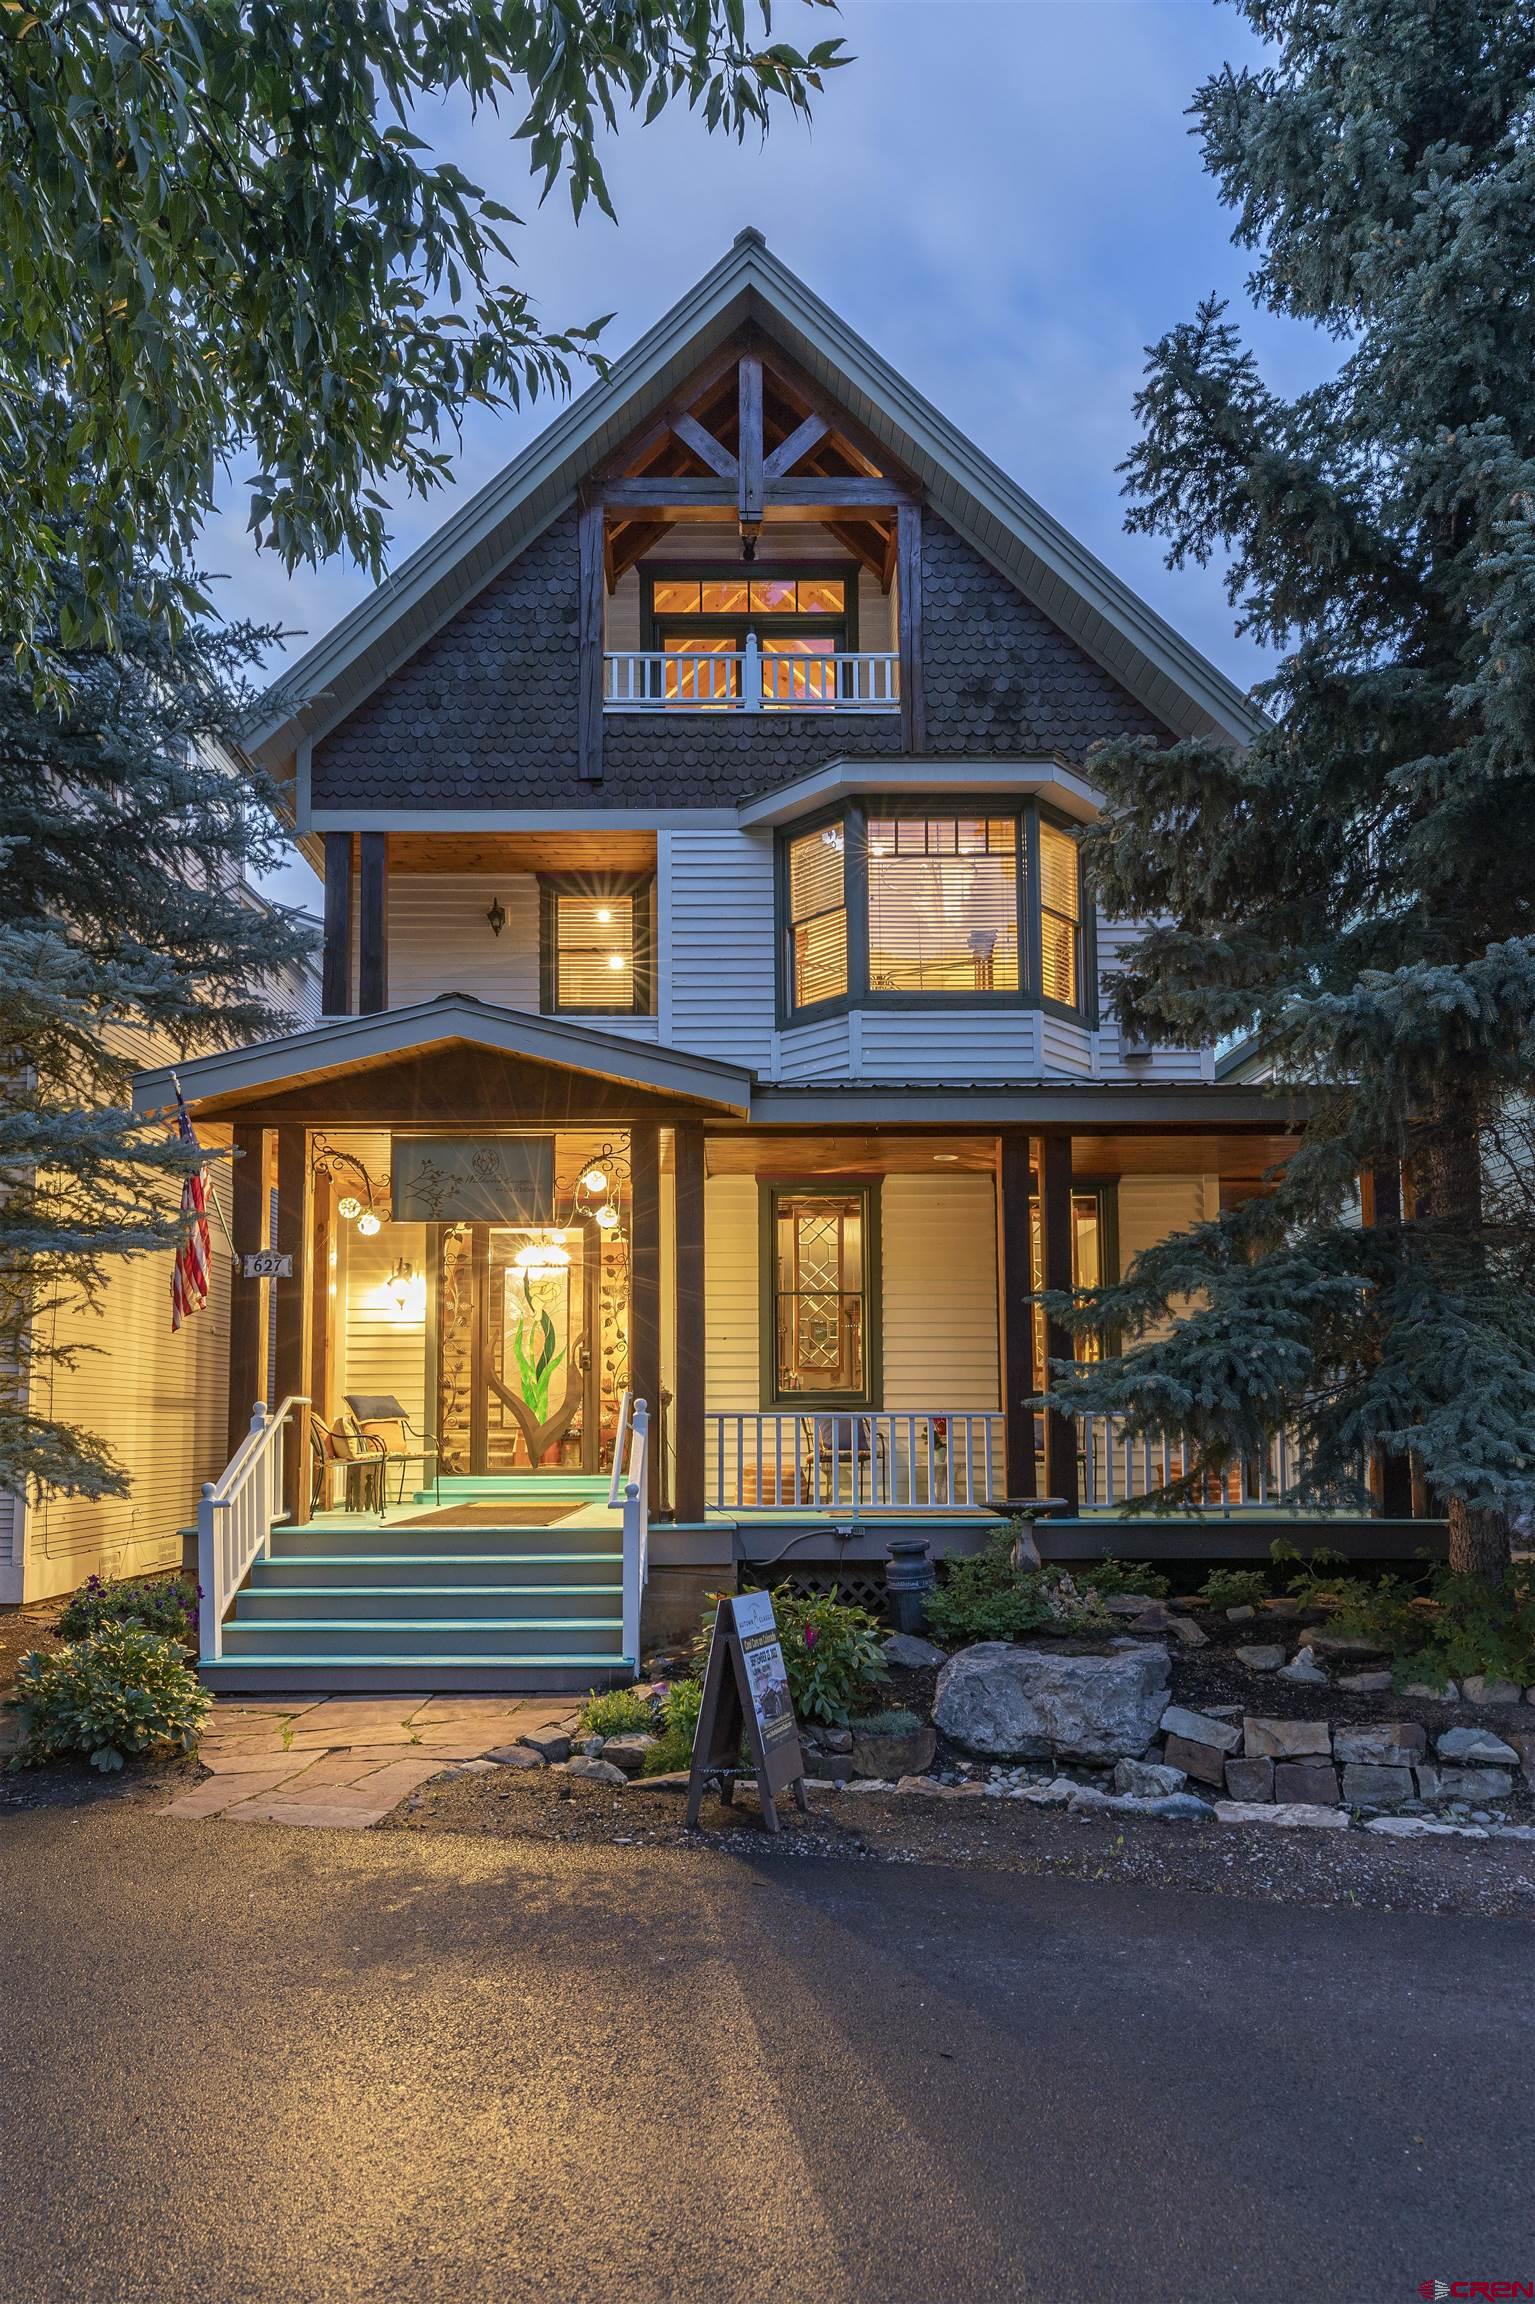 The perfect marriage of quality, location and space. This warm and sunny west end gem boasts 6 decks and 2 porches to enjoy the magic of the mountains from every vantage point. Four luxury suites were updated in 2019, each with ensuite baths. The open concept living/dining/kitchen with its vaulted ceiling, timber frames, gas fireplace, and hot tub deck is the quintessential mountain retreat while being steps from Telluride's vibrant downtown. A second kitchen and living area offers plenty of space for large families or remodel opportunity. Currently operated as the Wildwood Canyon Inn, this spacious residence has a transferable STR license. This home is truly your WISH come true!